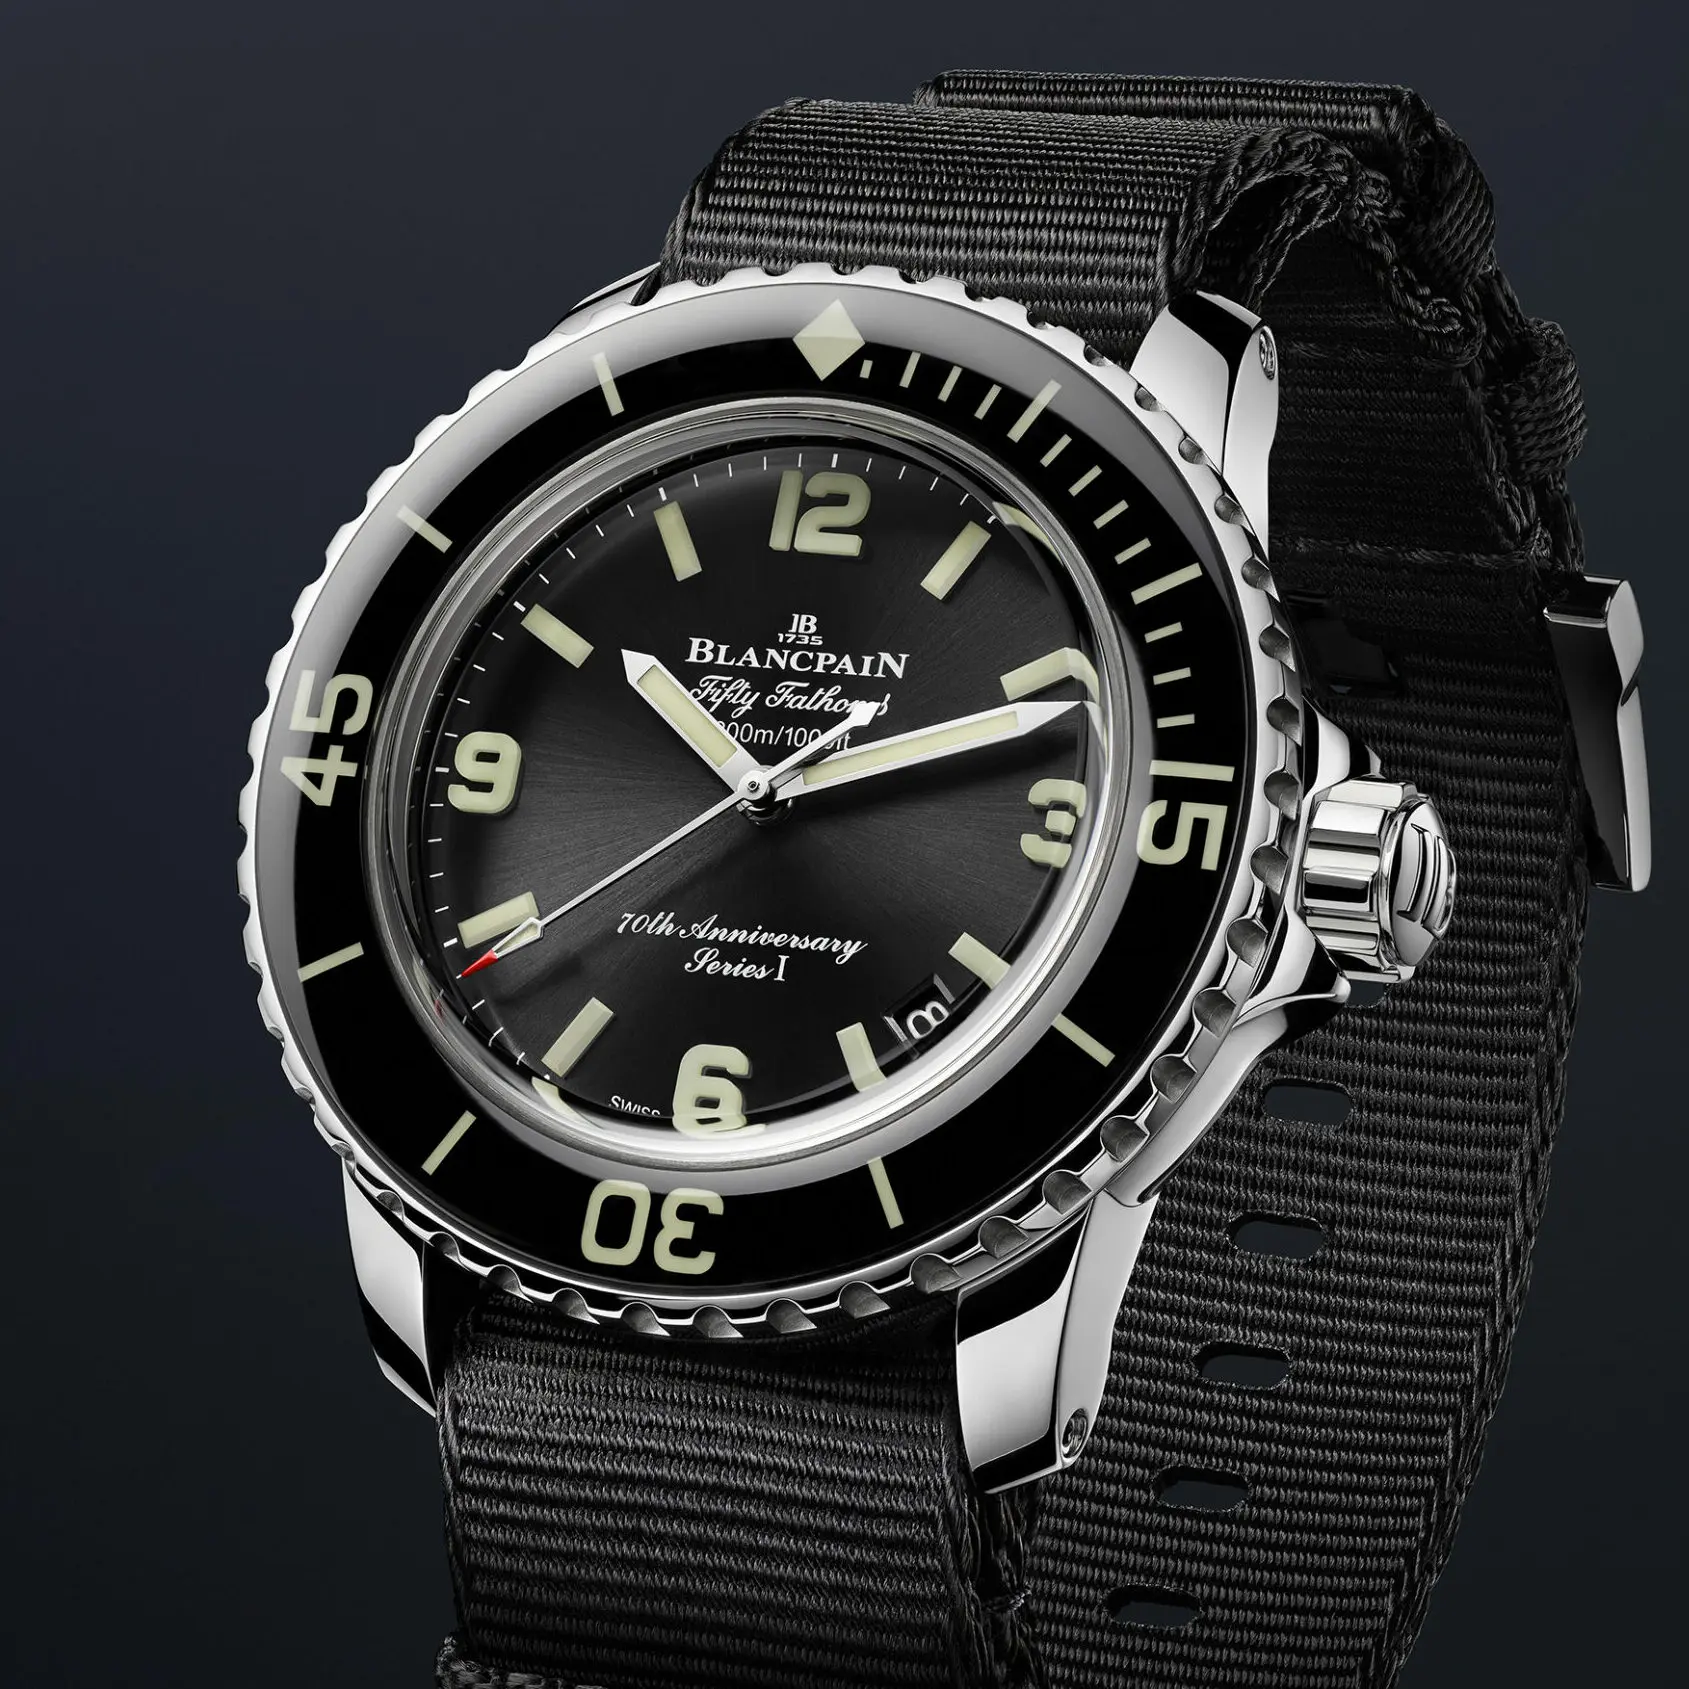 Introducing: The Blancpain Fifty Fathoms 70th Anniversary Act 1